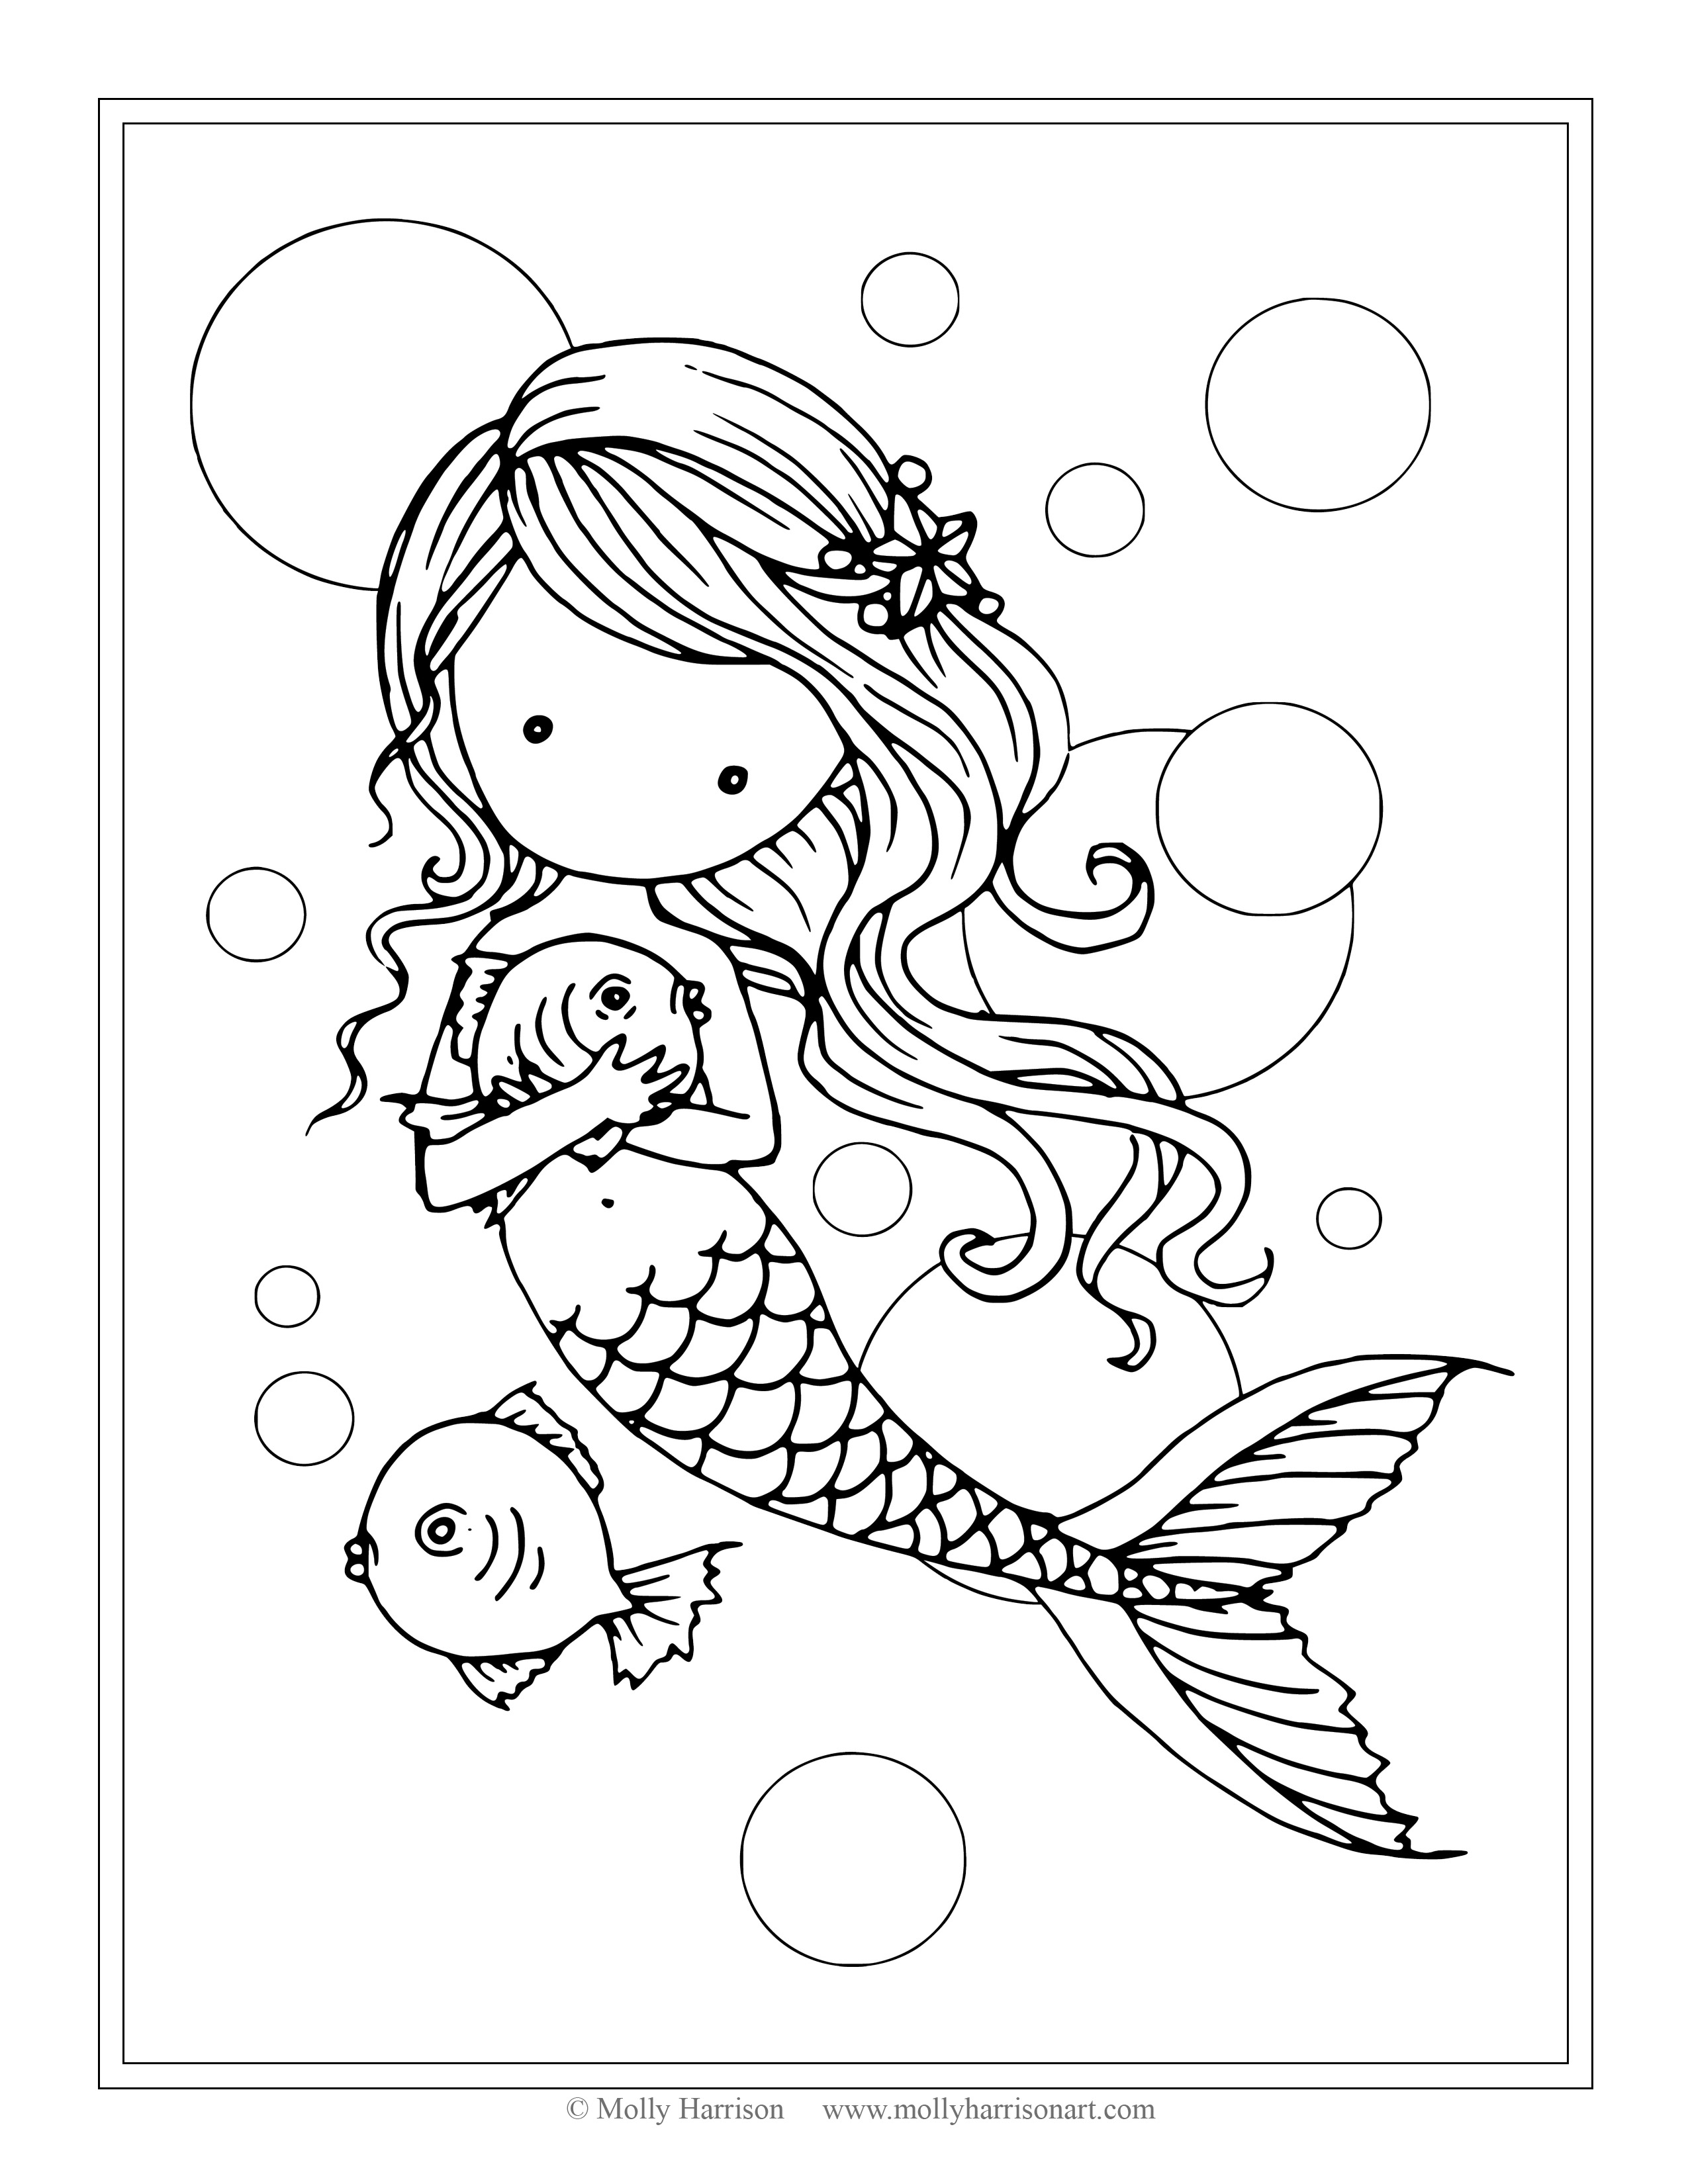 mermaid-fairy-coloring-pages-at-getcolorings-free-printable-colorings-pages-to-print-and-color